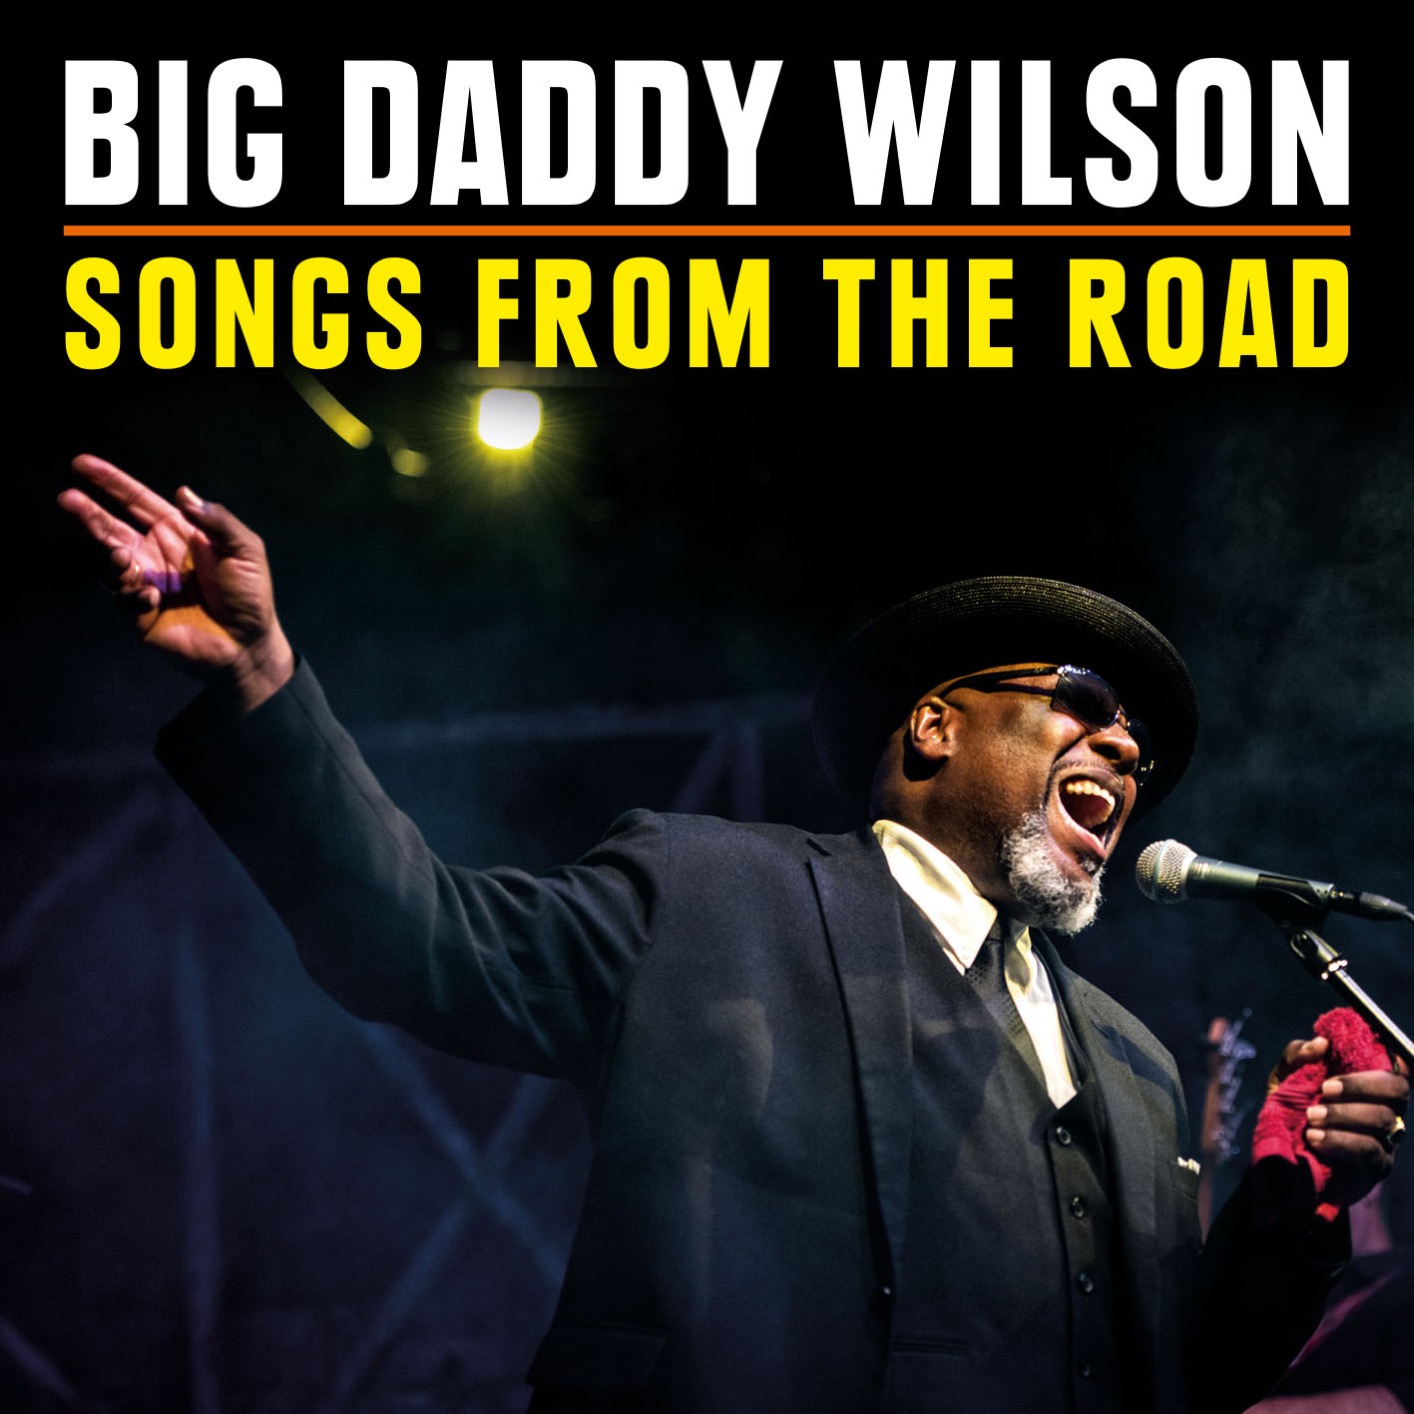 Big Daddy Wilson – Songs from the Road (2018) [FLAC 24bit/44,1kHz]